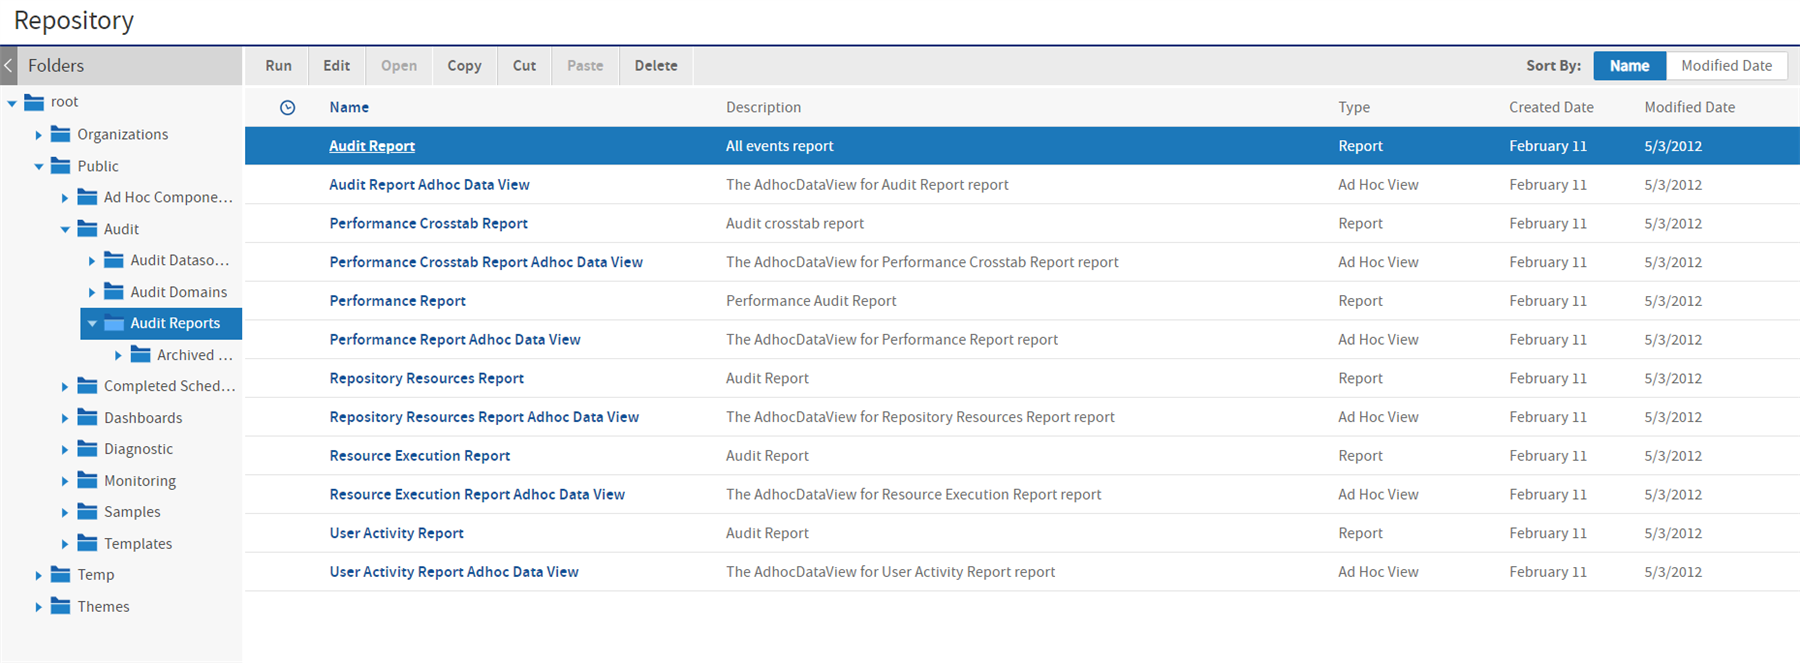 Screenshot of Trados Studio's Repository page showing folders and reports such as Audit Report, Performance Report, and User Activity Report with their descriptions and types.